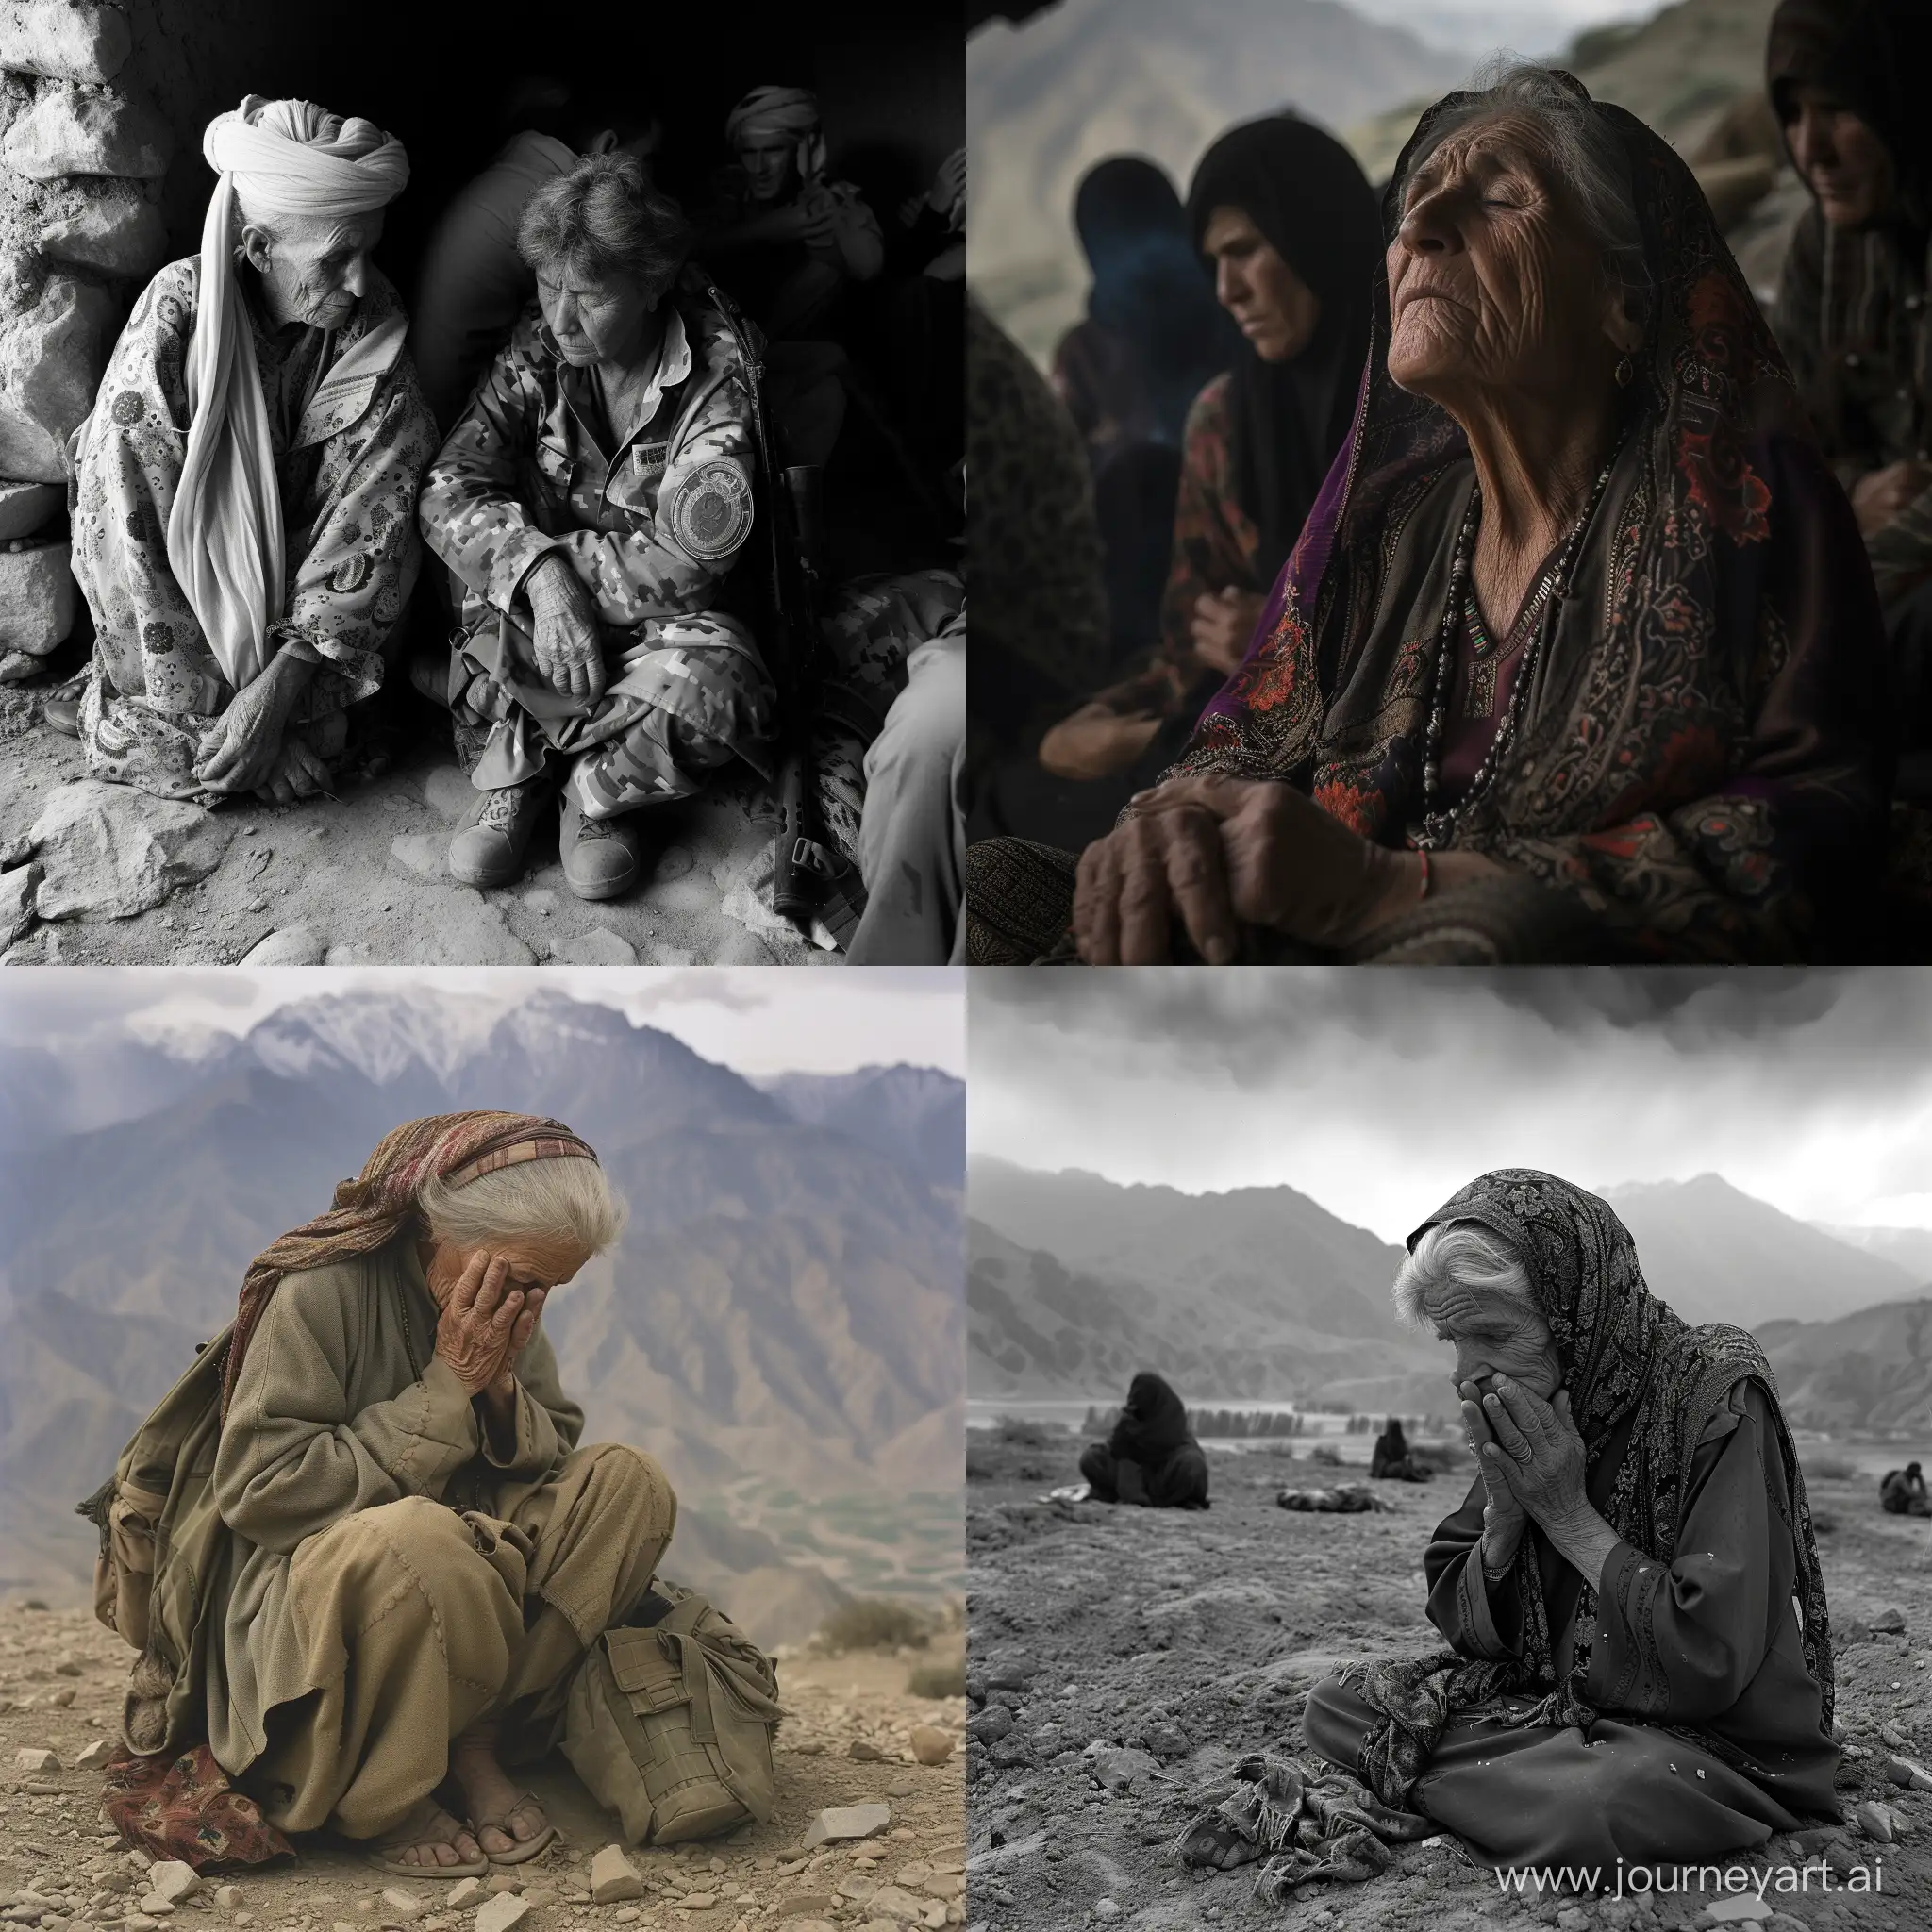 Mourning-Mother-in-Afghanistan-Valley-Tribute-to-Fallen-Warrior-Son